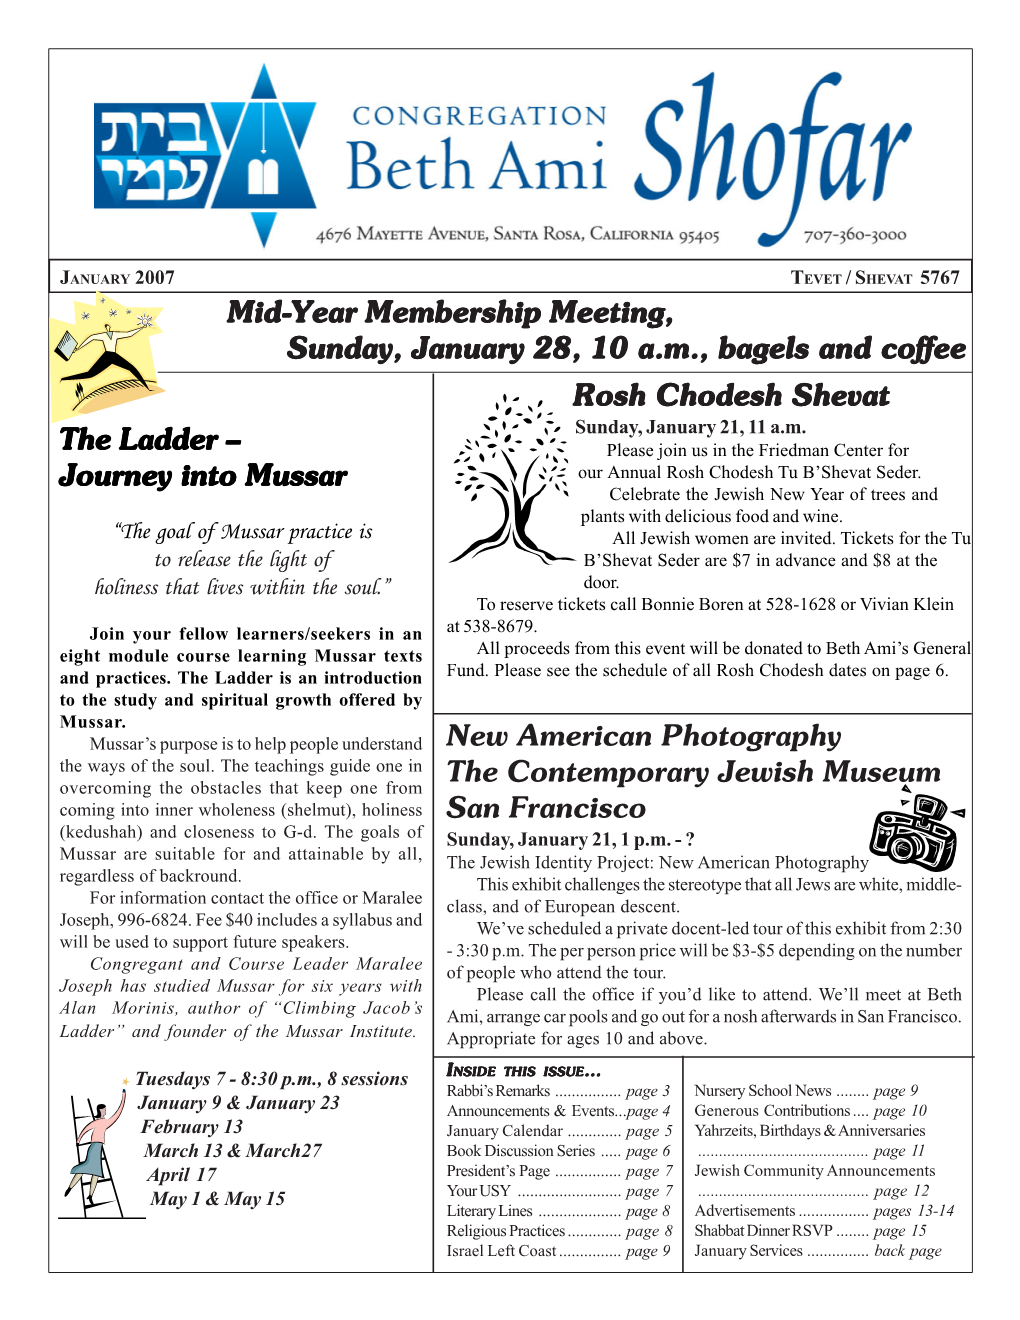 JANUARY 2007 TEVET / SHEVAT 5767 Mid-Year Membership Meeting, Sunday, January 28, 10 A.M., Bagels and Coffee Rosh Chodesh Shevat Sunday, January 21, 11 A.M